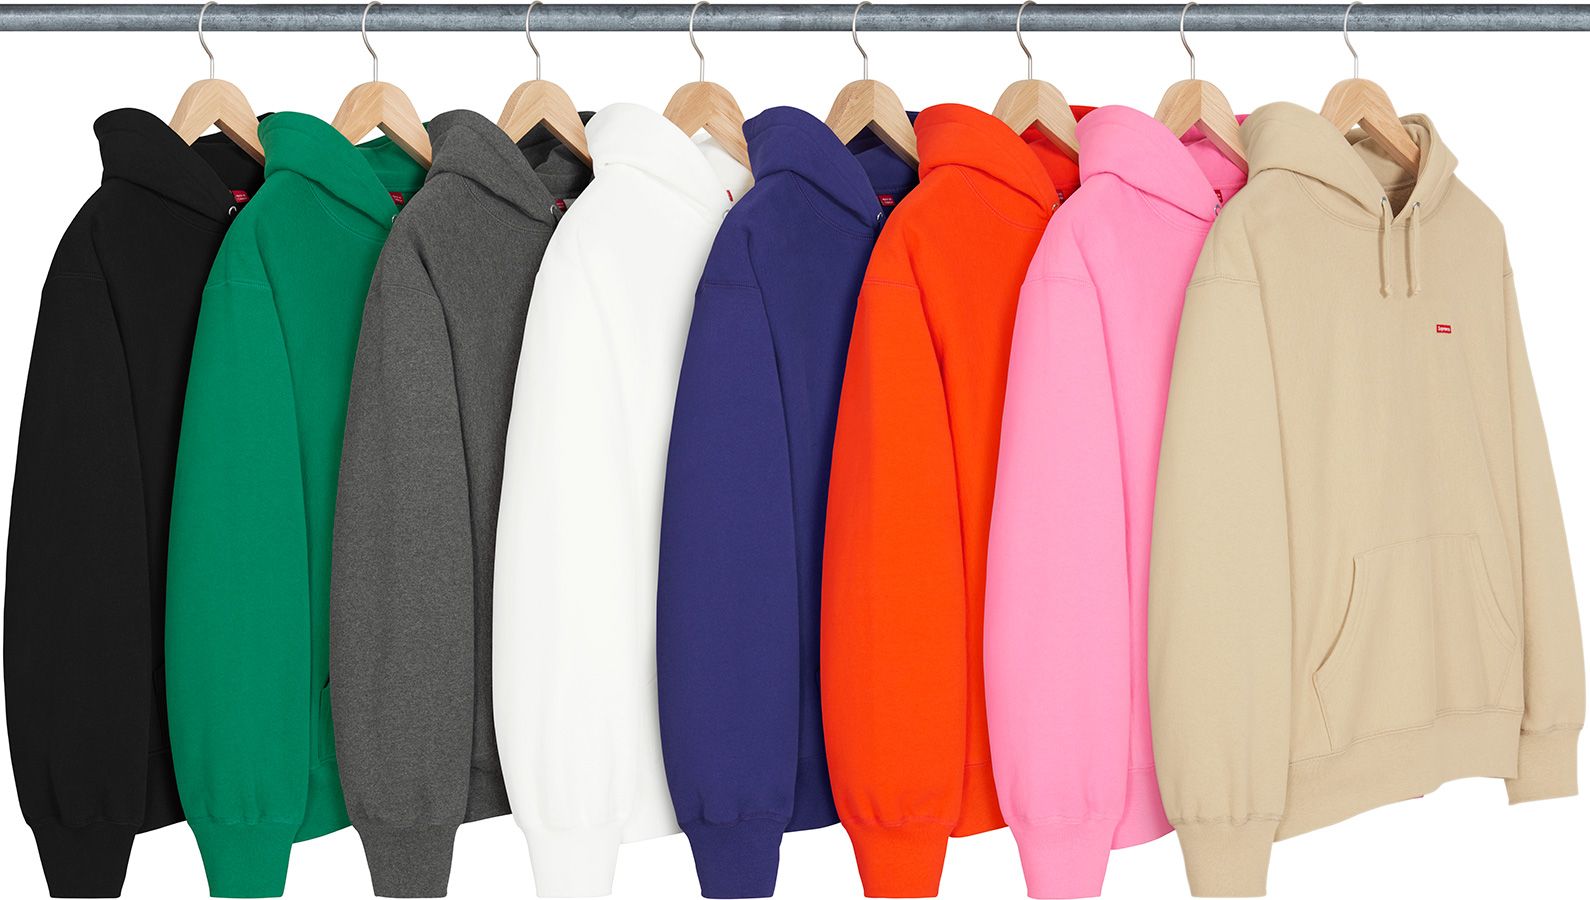 Number One Hooded Sweatshirt - Fall/Winter 2021 Preview – Supreme